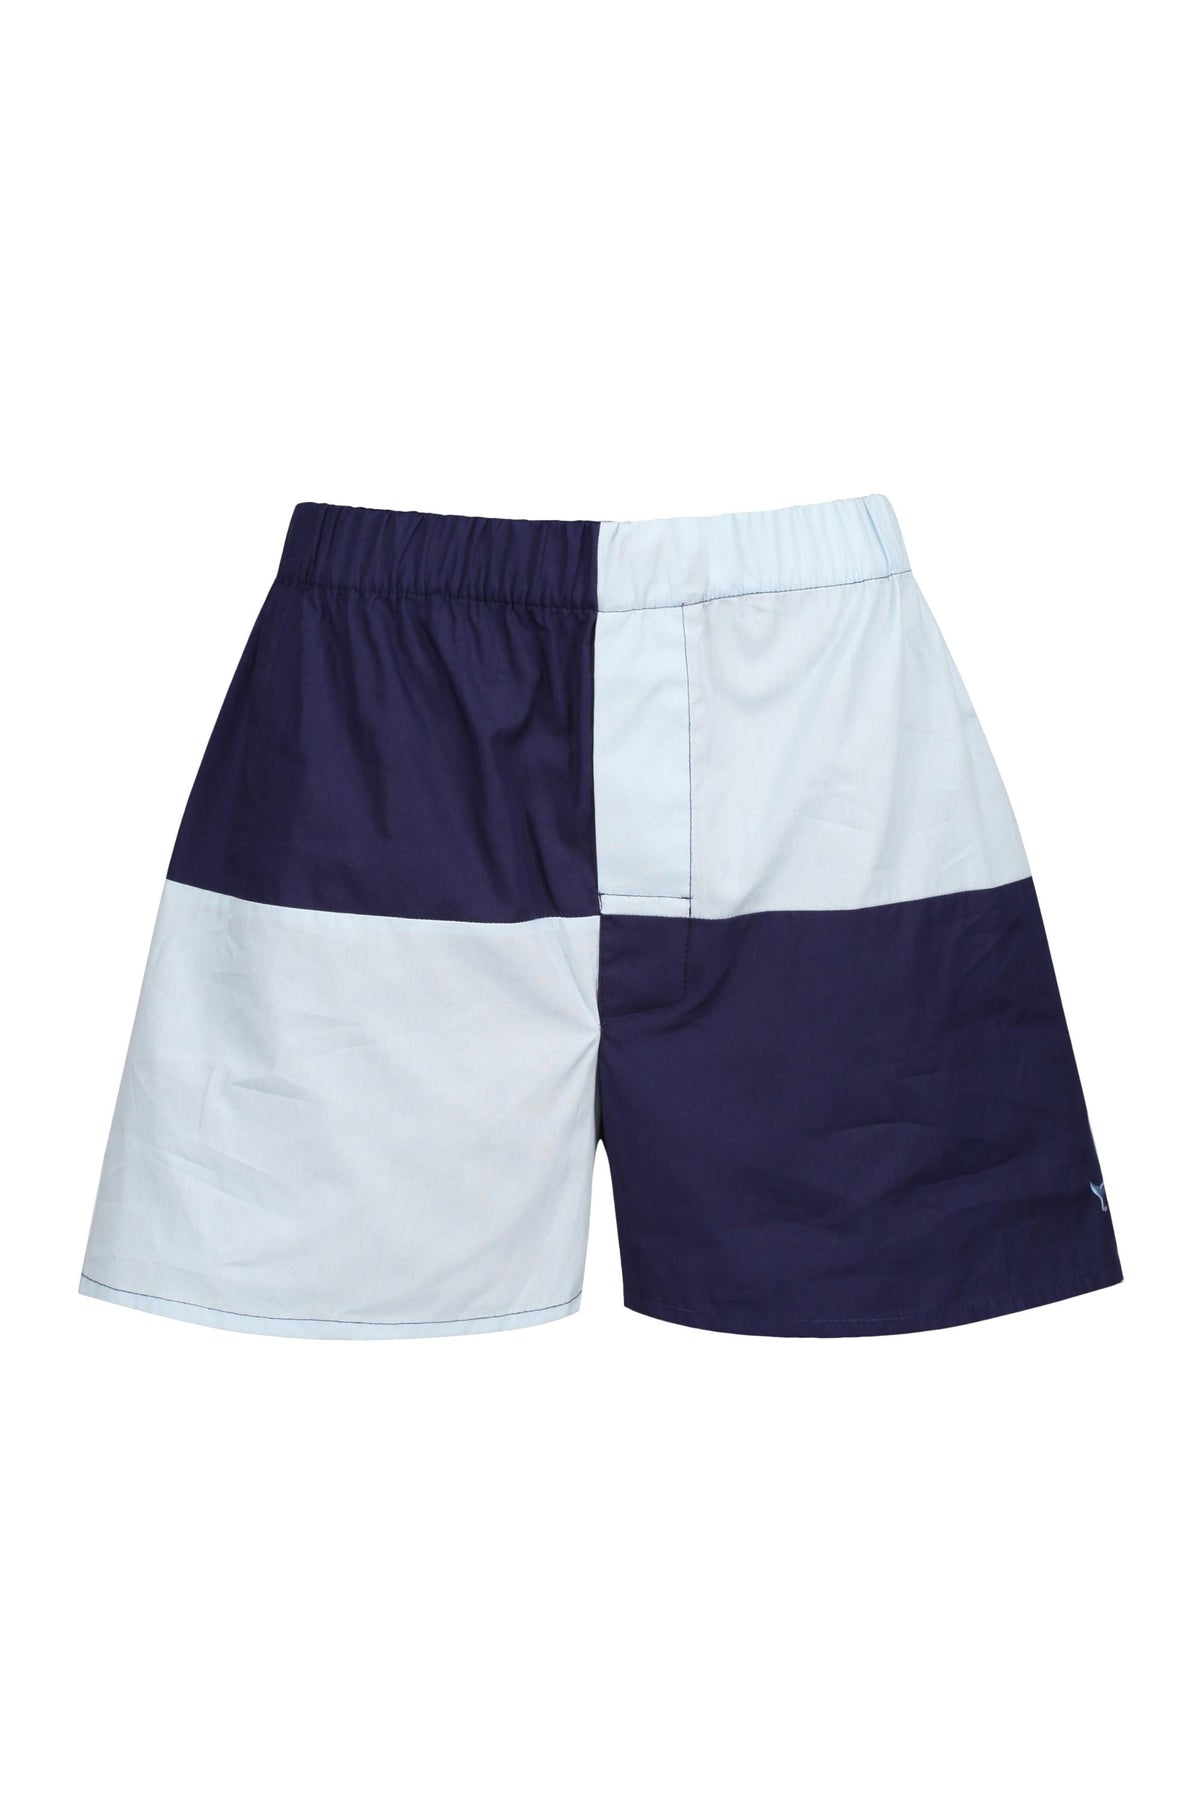 Signature Boxer Shorts - Blue - Whale Of A Time Clothing